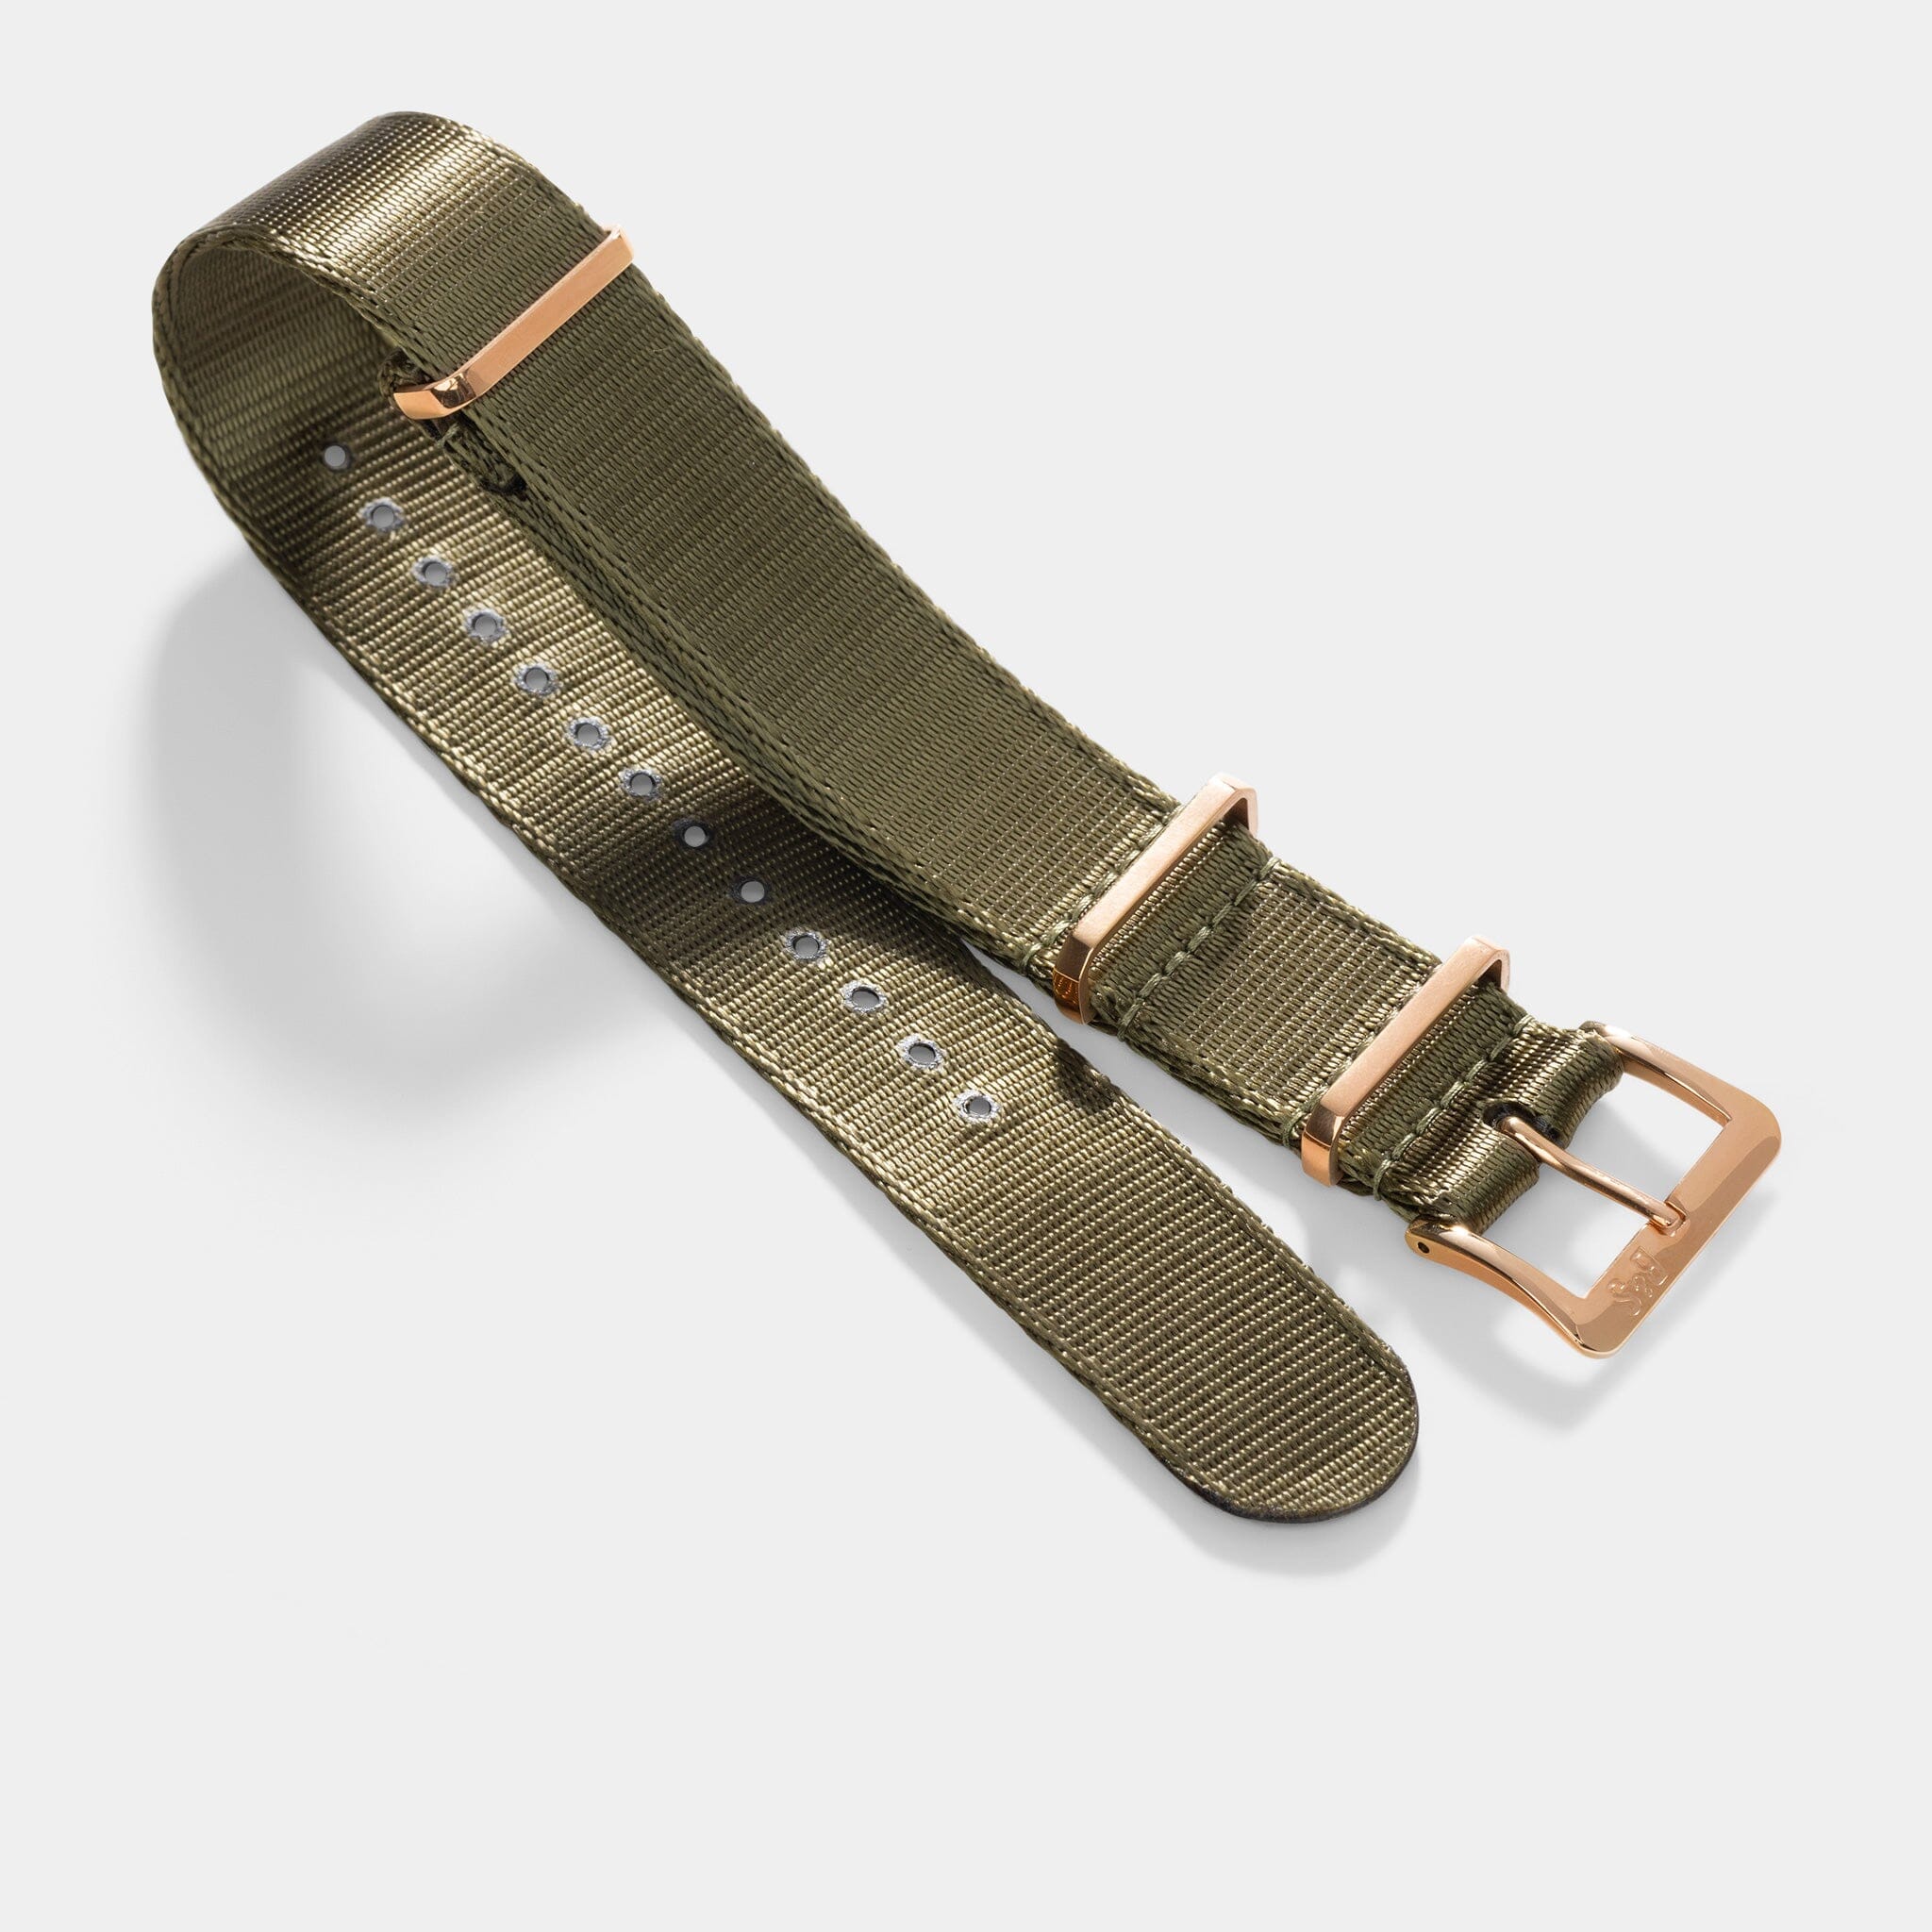 Deluxe Nylon Single Pass Watch Strap Olive Drab Green - Rose Gold